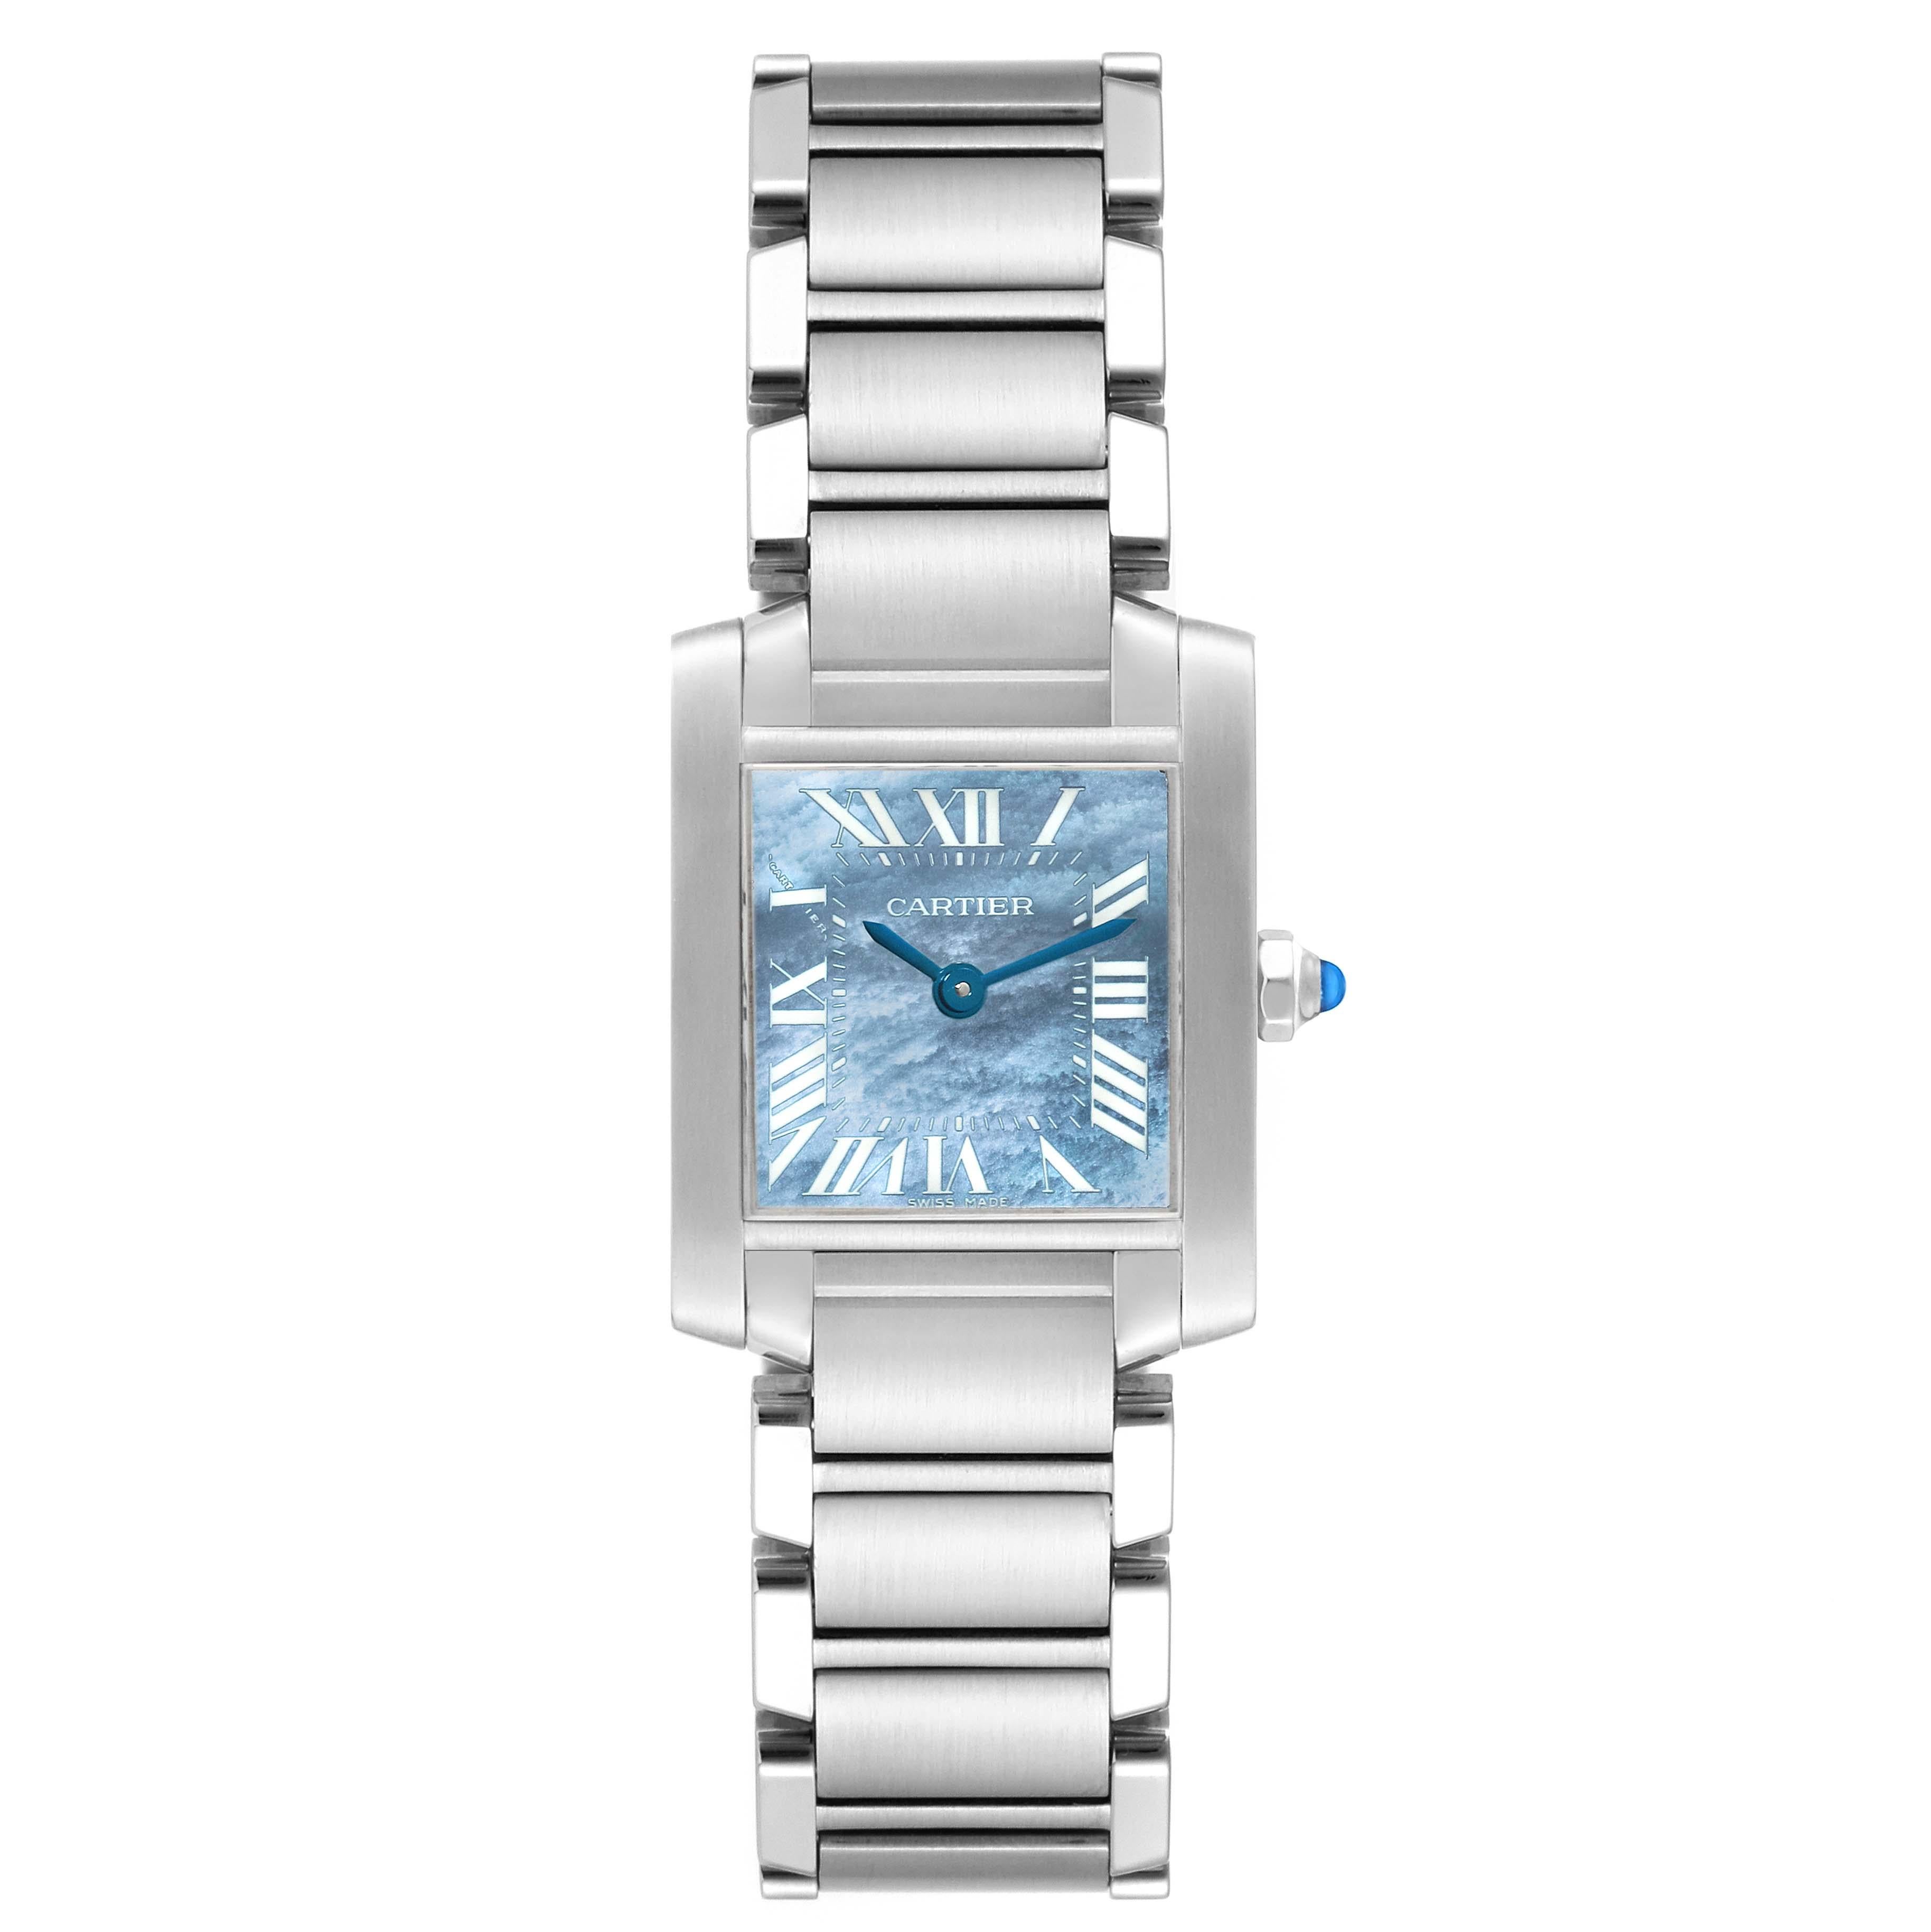 Cartier Tank Francaise Blue Mother of Pearl Dial Steel Ladies Watch W51034Q3. Quartz movement. Rectangular stainless steel 20.0 x 25.0 mm case. Octagonal crown set with a blue spinel cabochon. . Scratch resistant sapphire crystal. Blue mother of